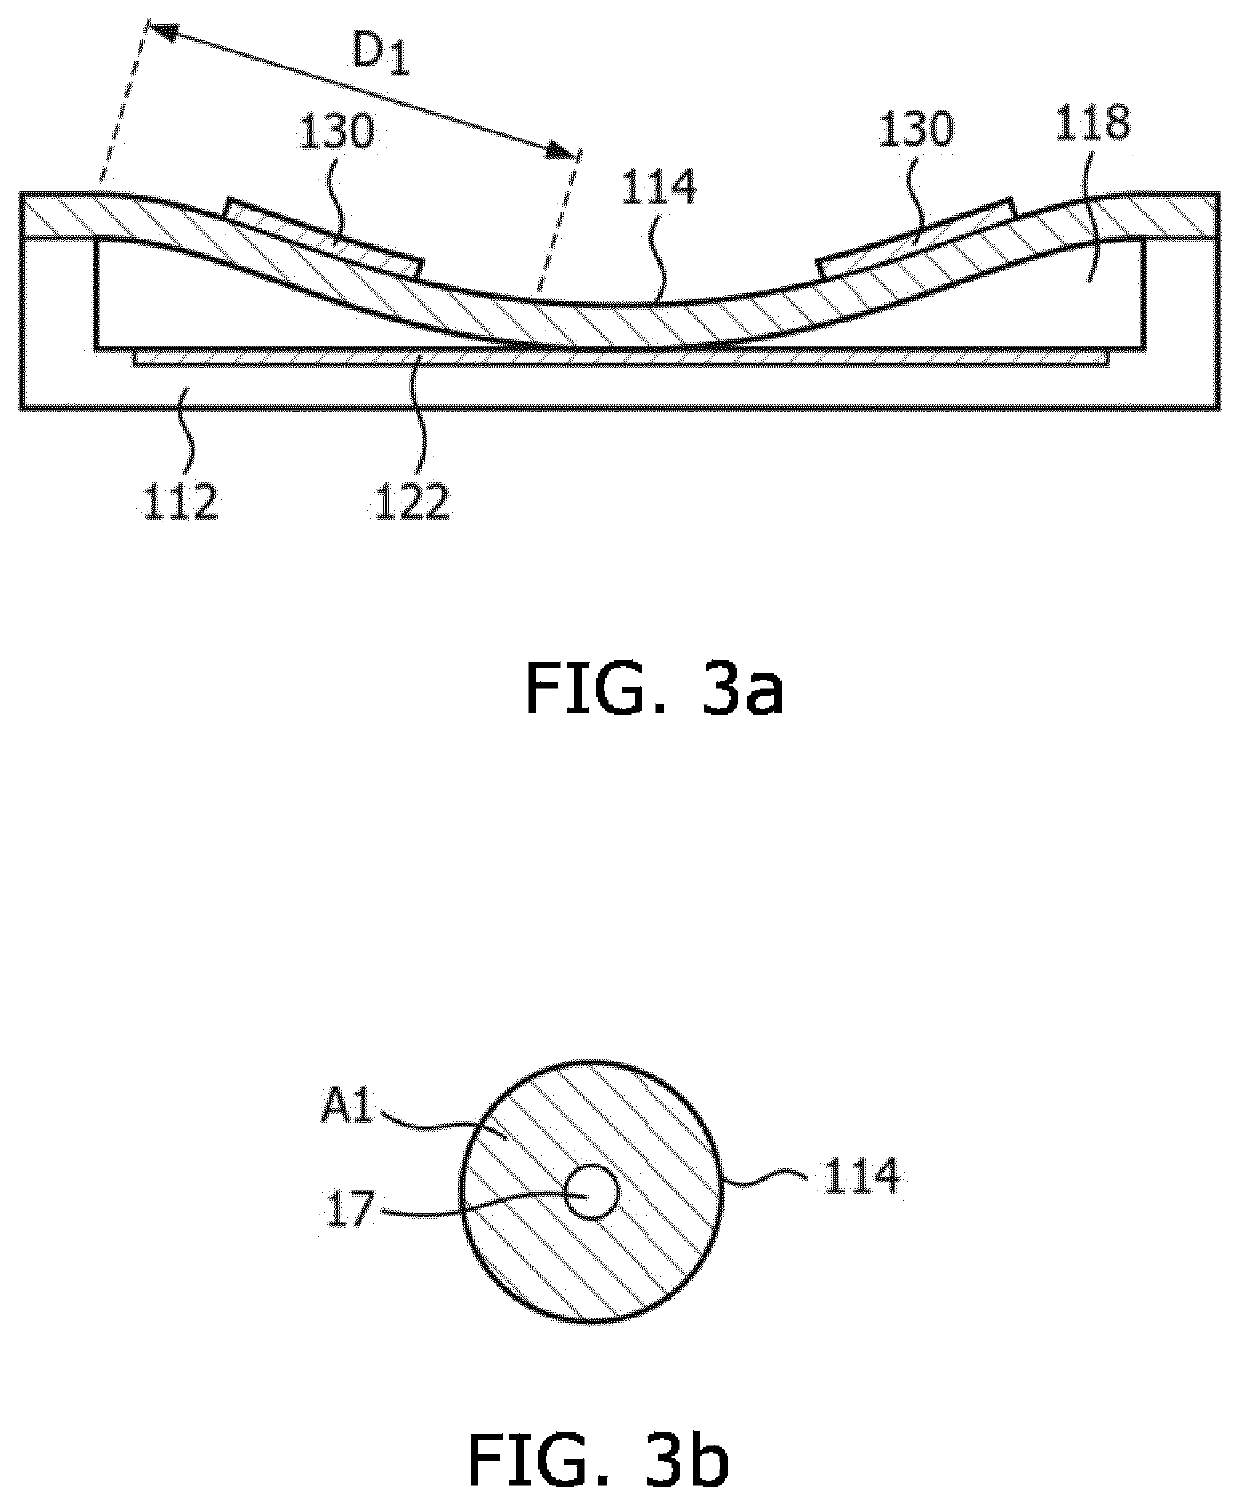 Ultrasound system and method